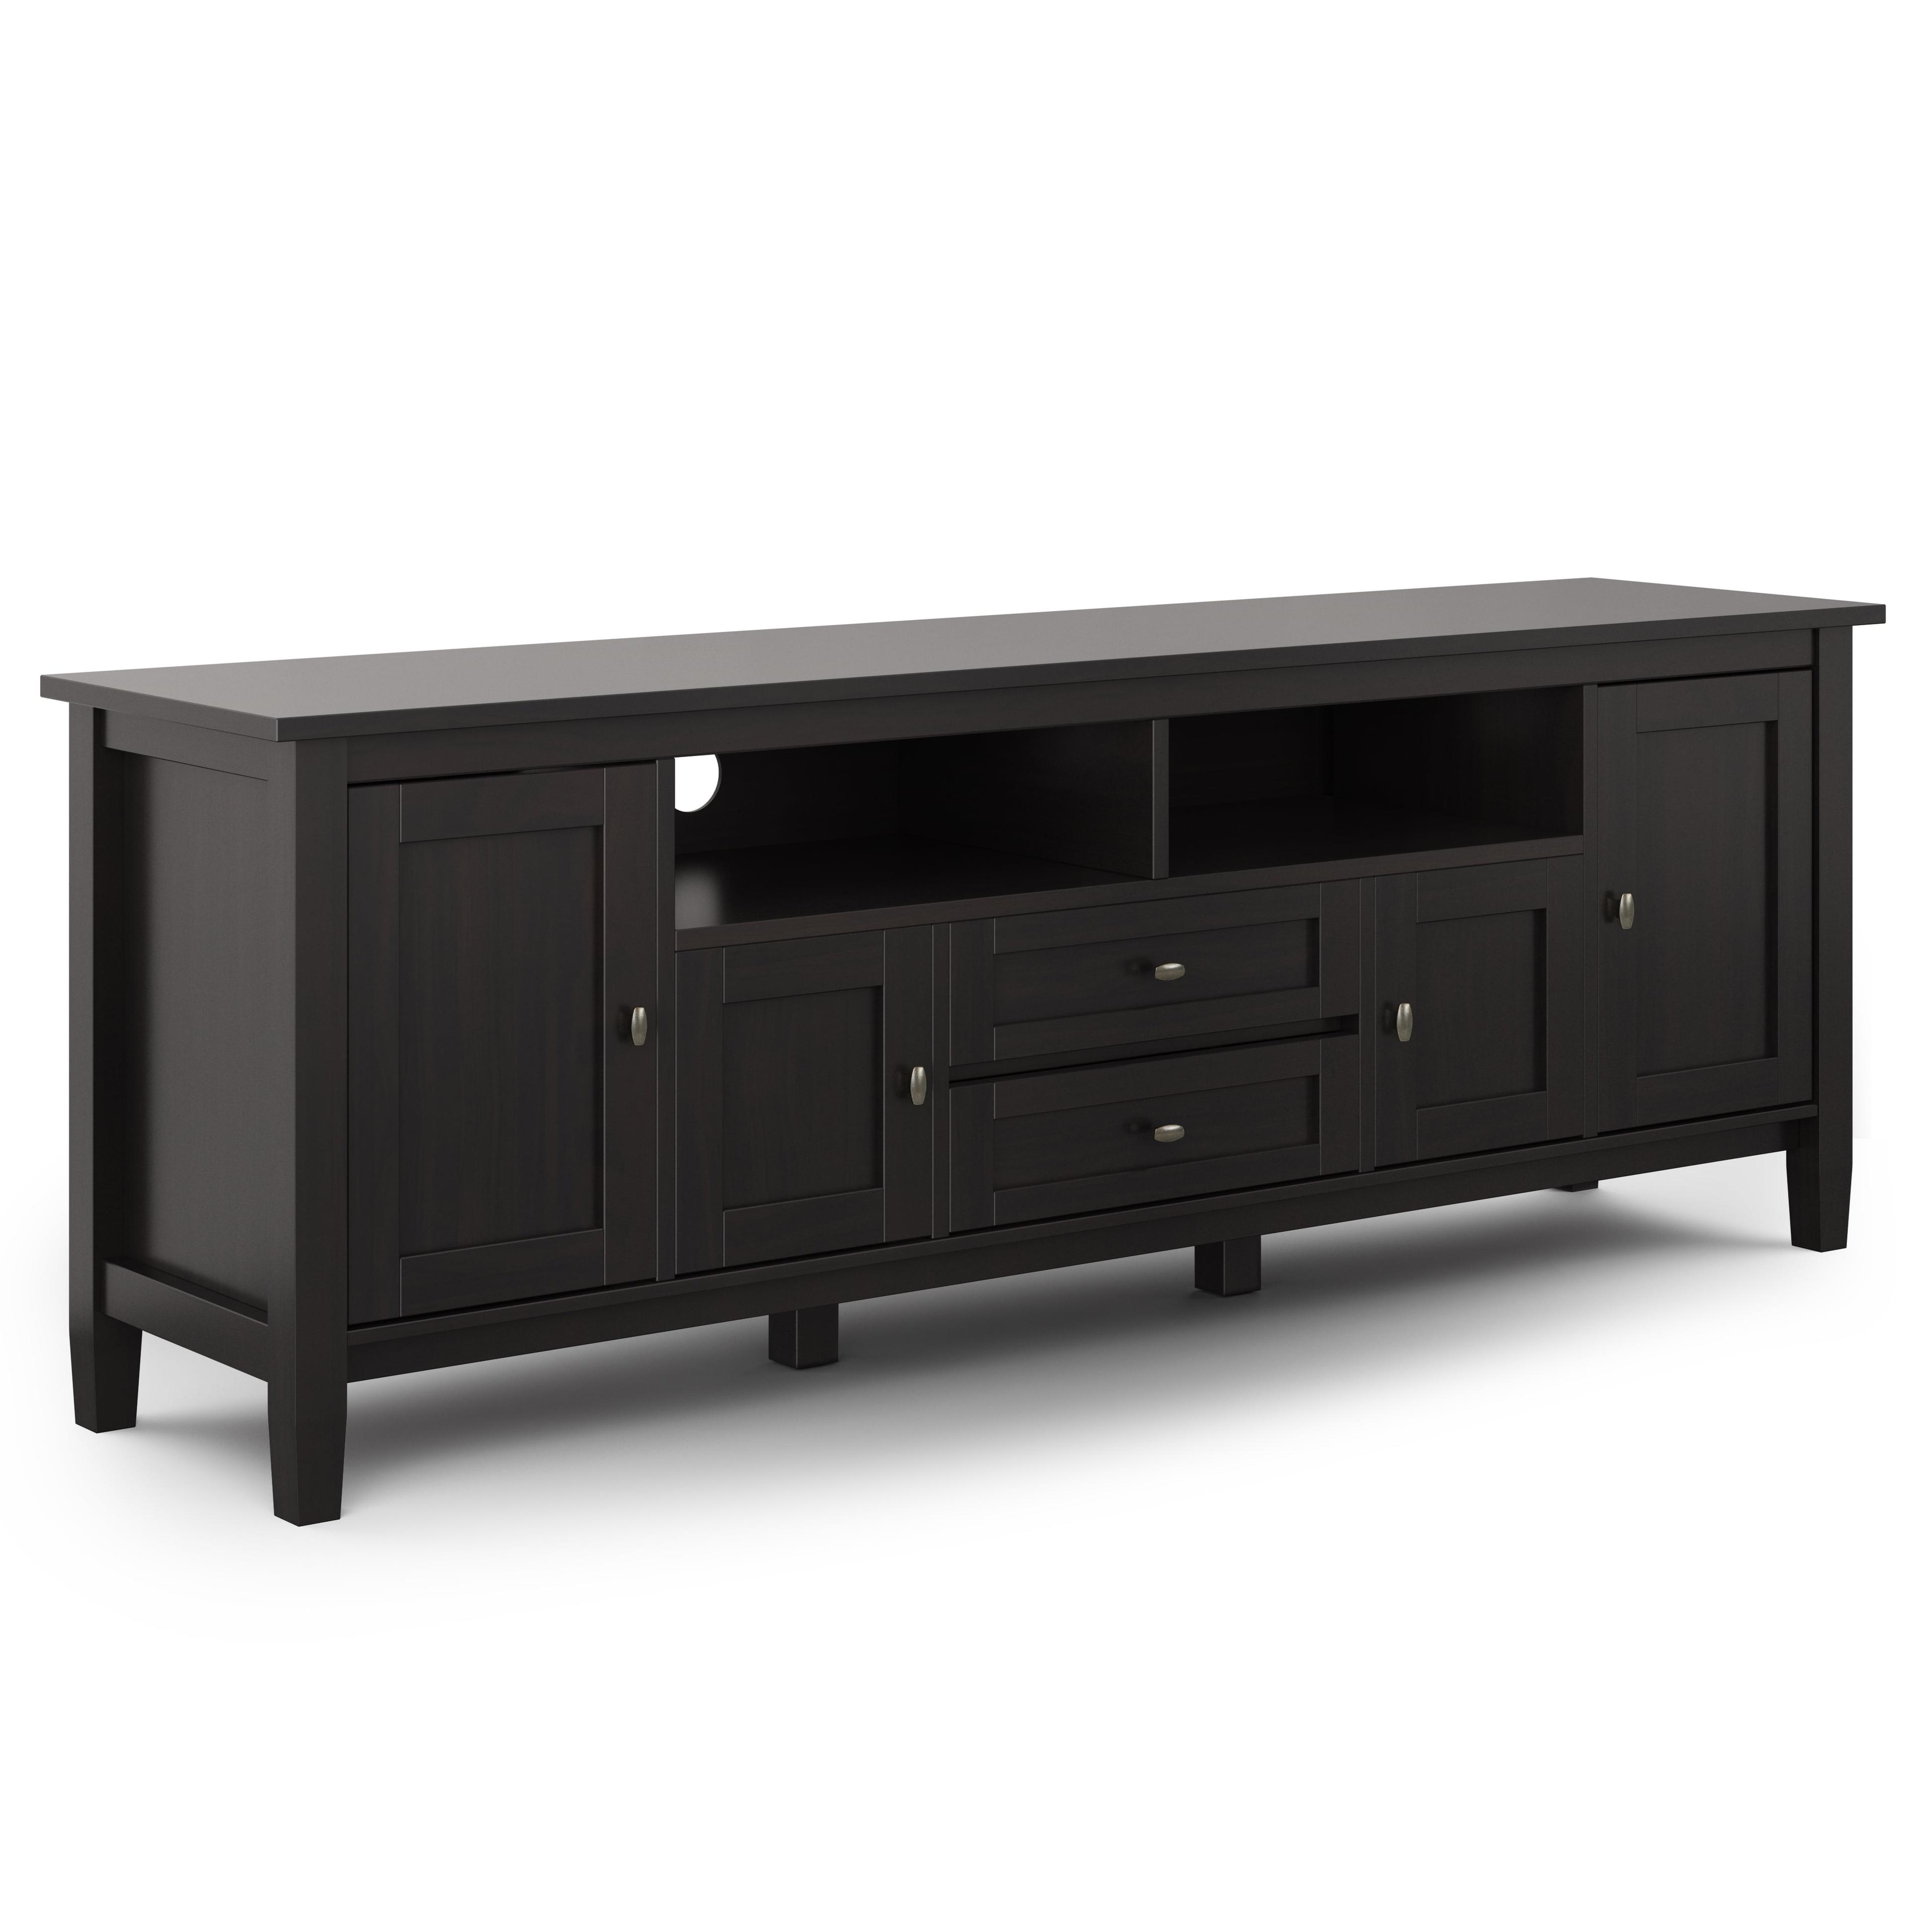 Warm Shaker 72" Solid Wood TV Stand in Hickory Brown